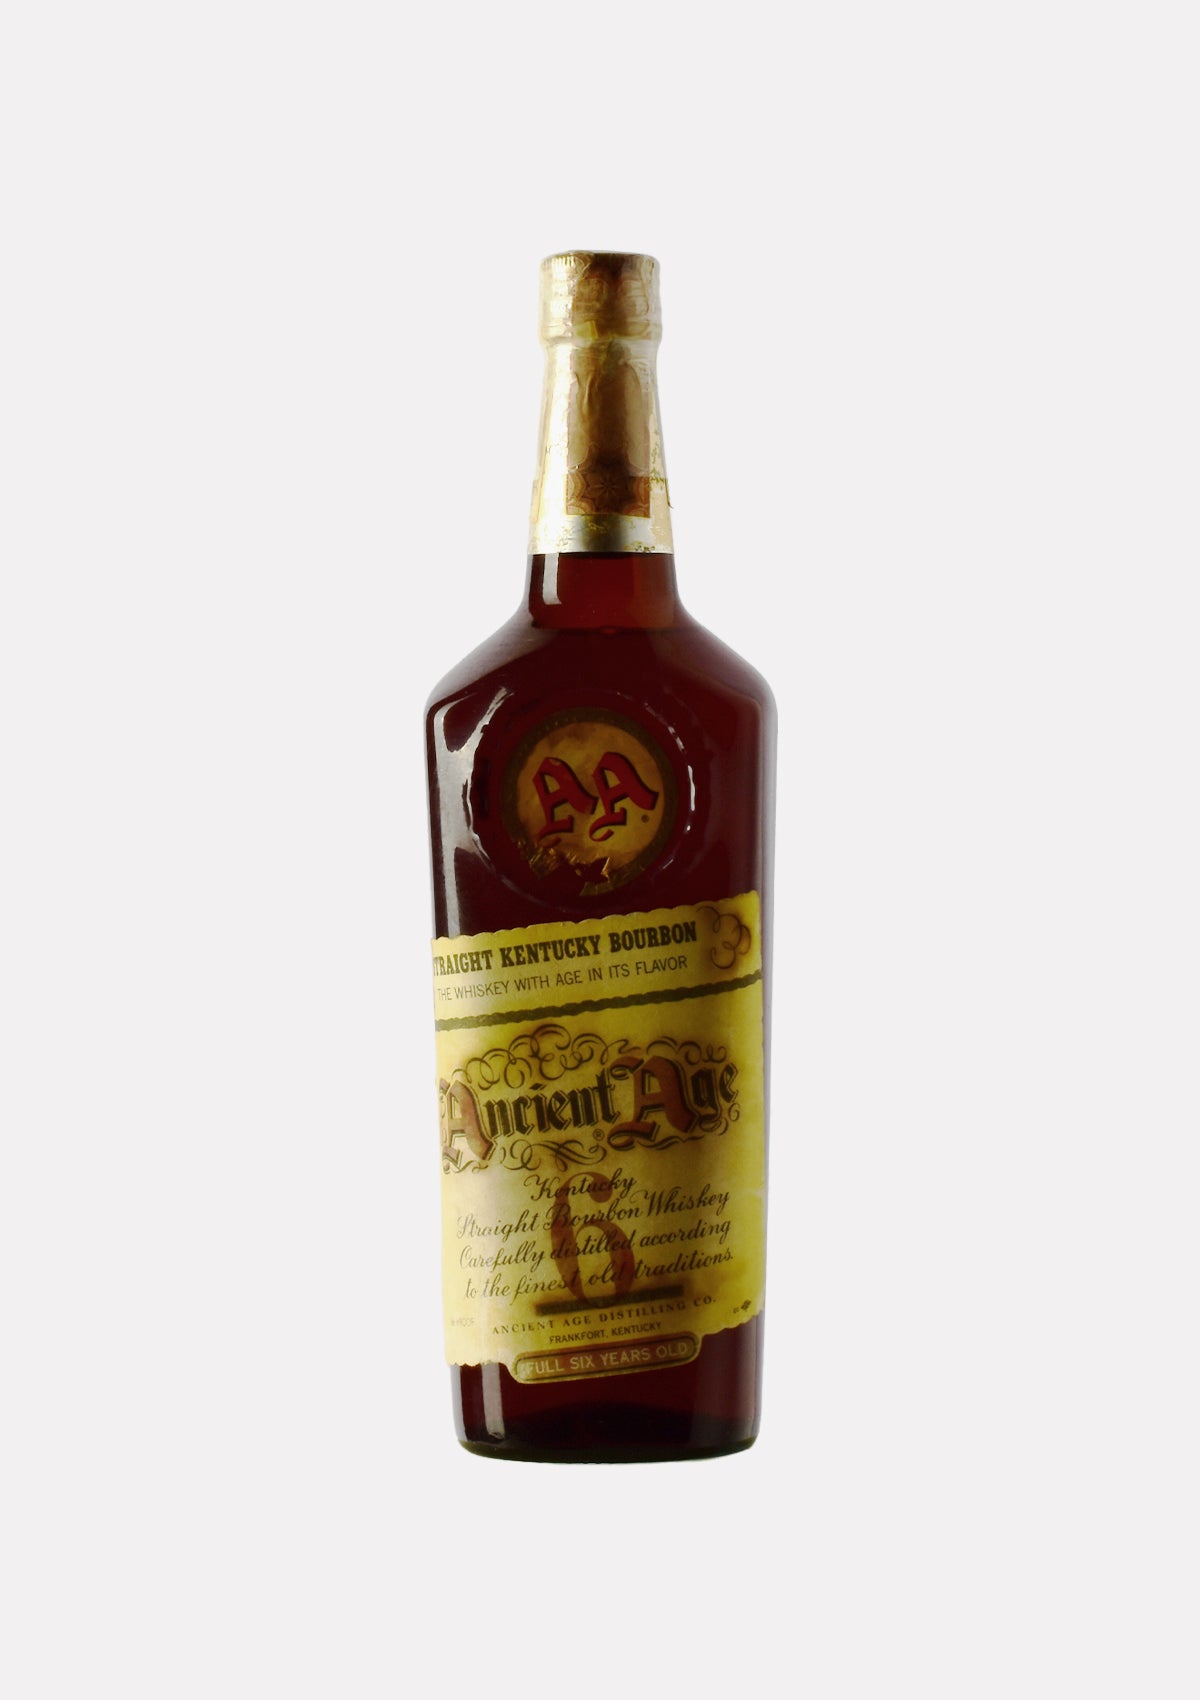 Ancient Age Kentucky Straight Bourbon Whiskey 6 Jahre